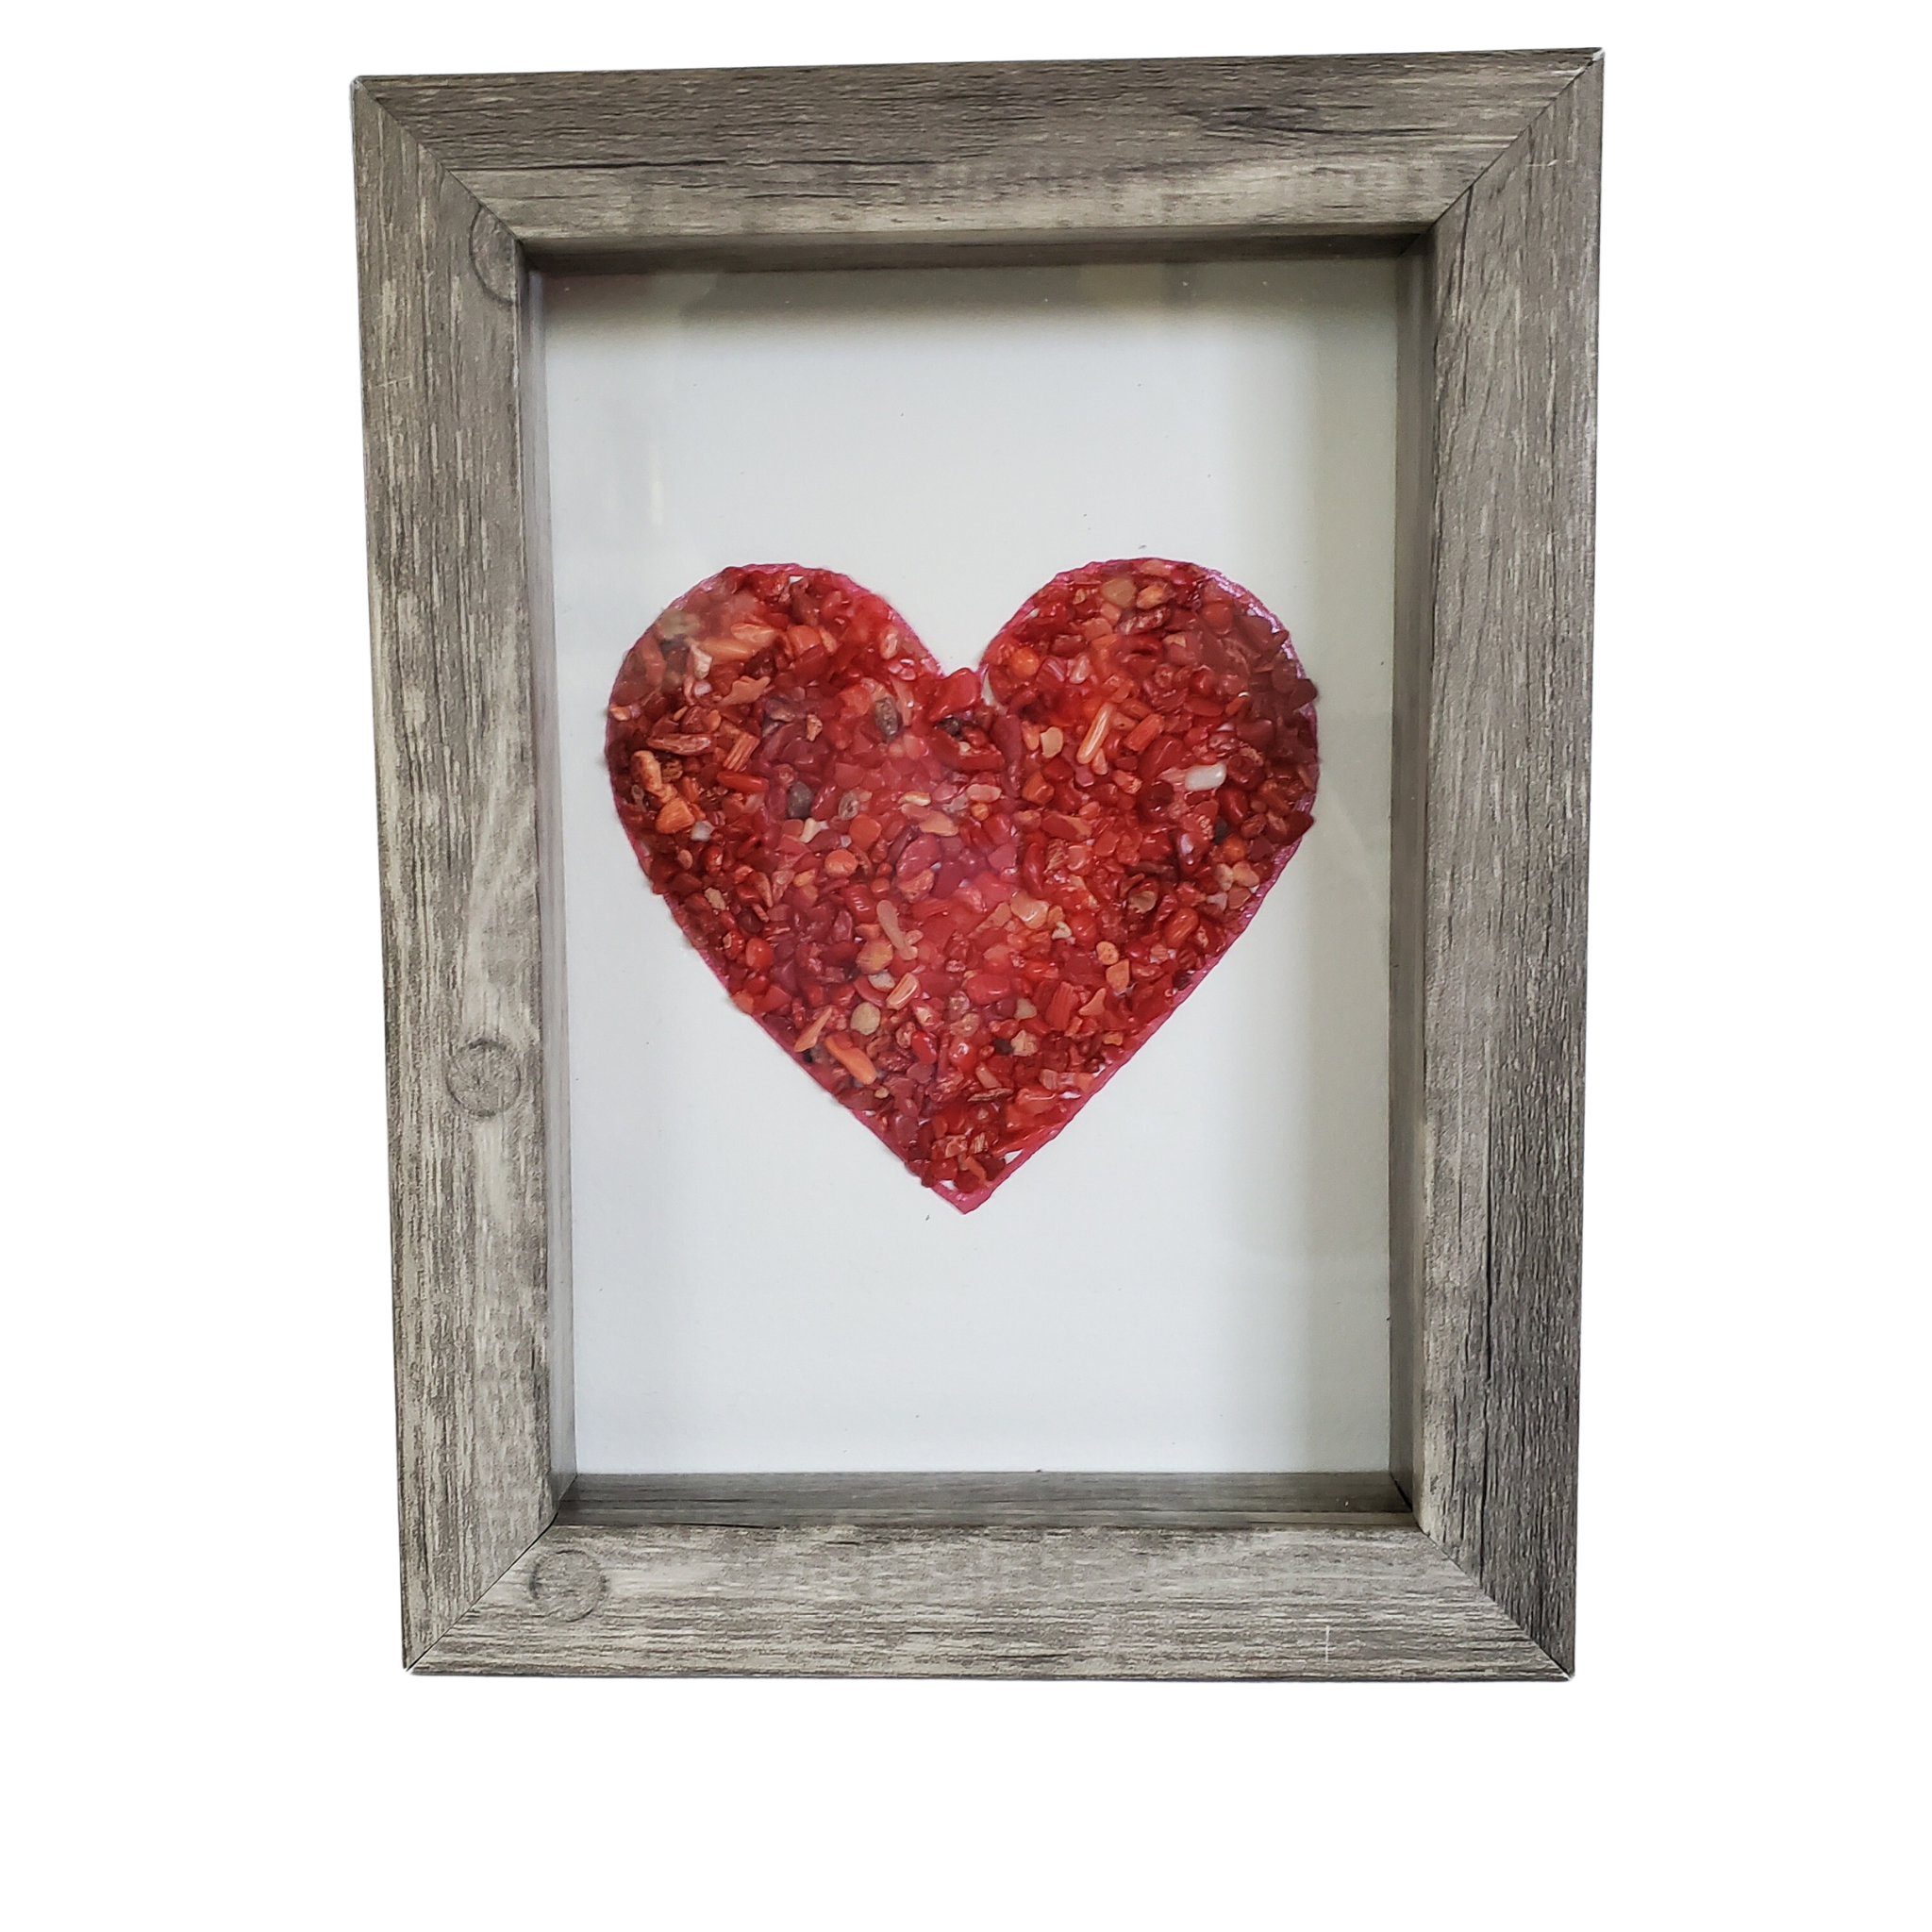 Heart Red Coral Shadowbox Art